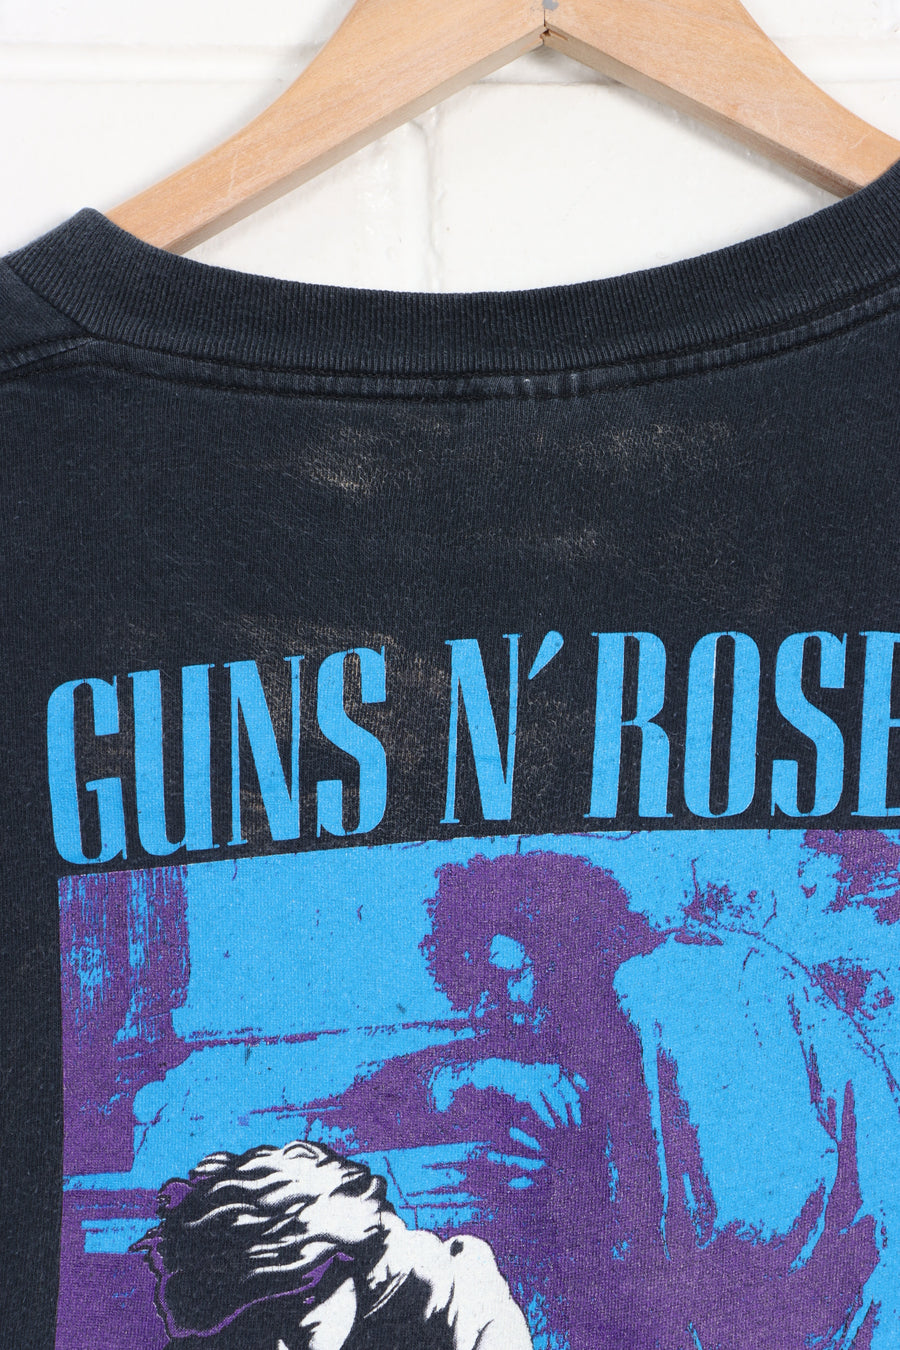 Guns N' Roses 1991 'Use Your Illusion' Front Back T-Shirt USA Made (L)